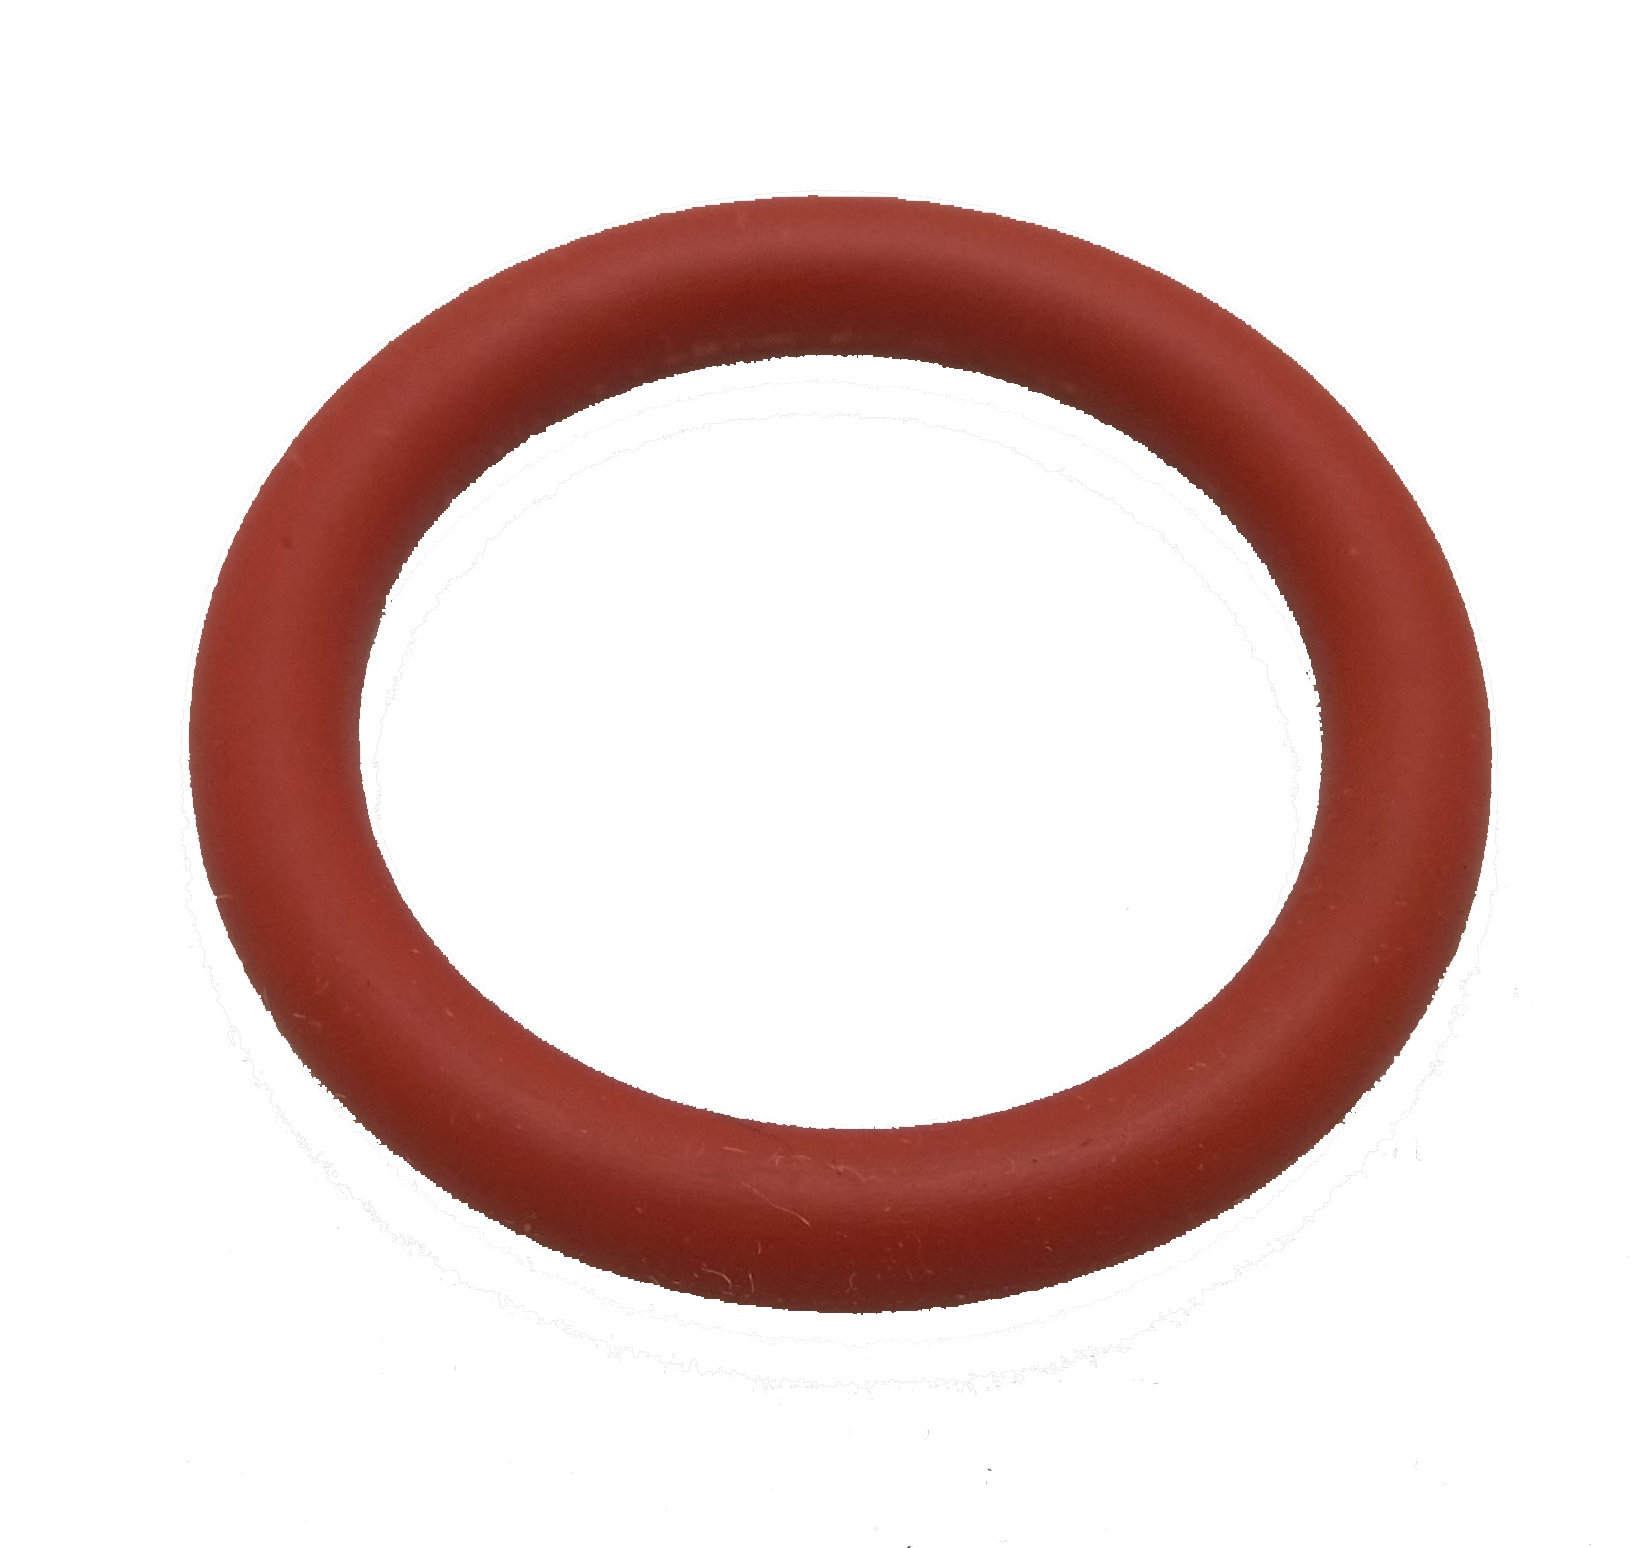 O-ring - 30 OD, 22 ID, 4W BCG Silicone 40 Durometer